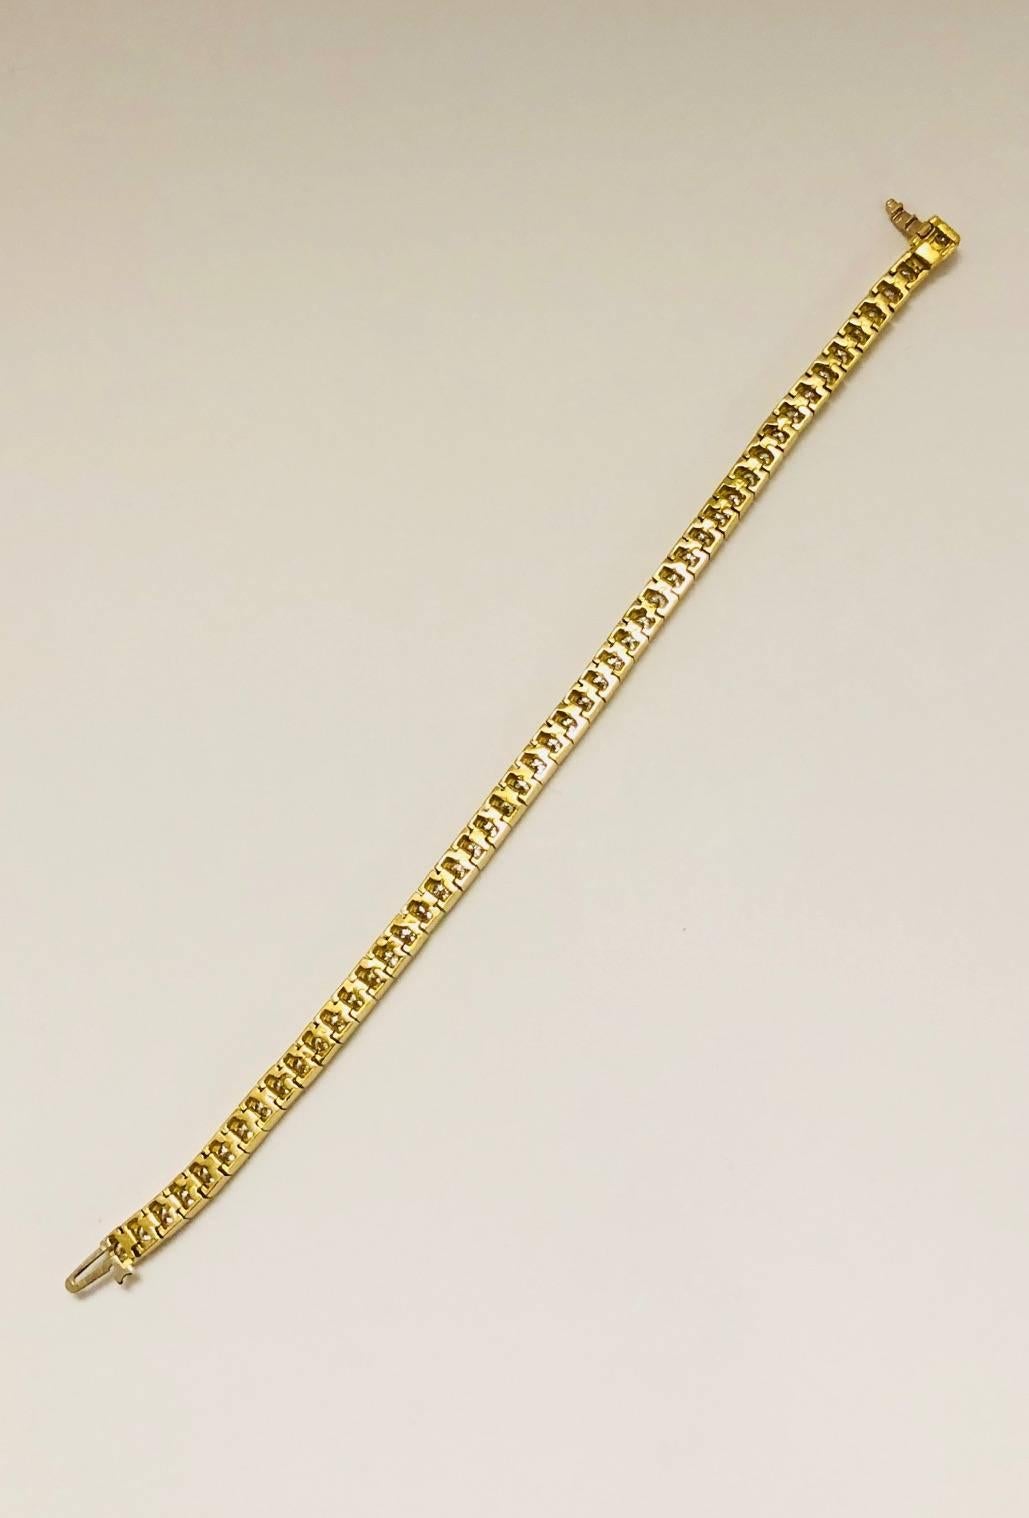 Diamond Yellow Gold Tennis Bracelet In Excellent Condition For Sale In Palm Beach, FL